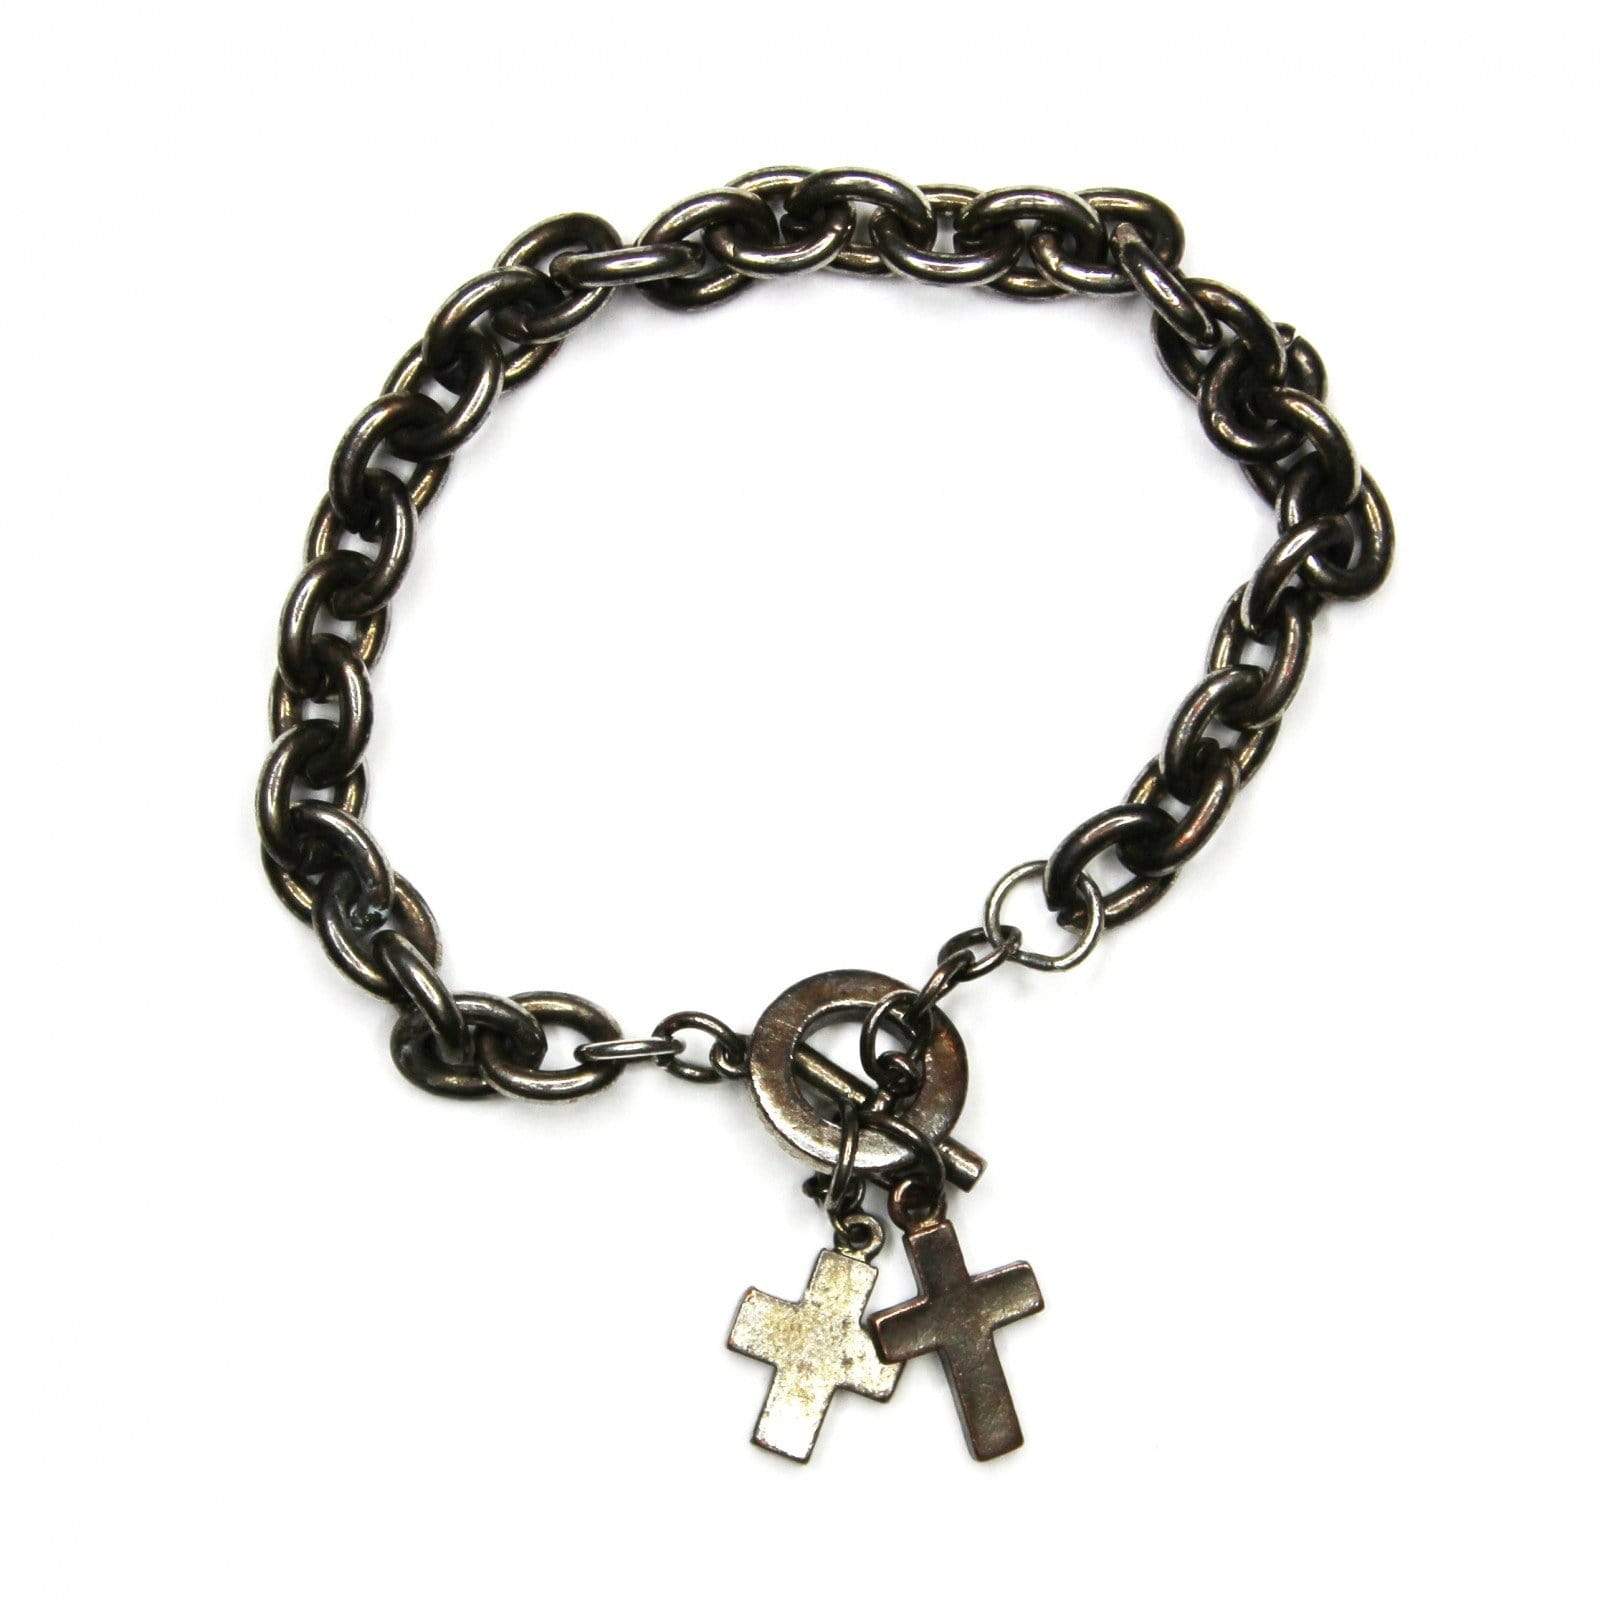 Silver Givenchy Cross Charm Bracelet with Crystal Accents RSTKD Vintage